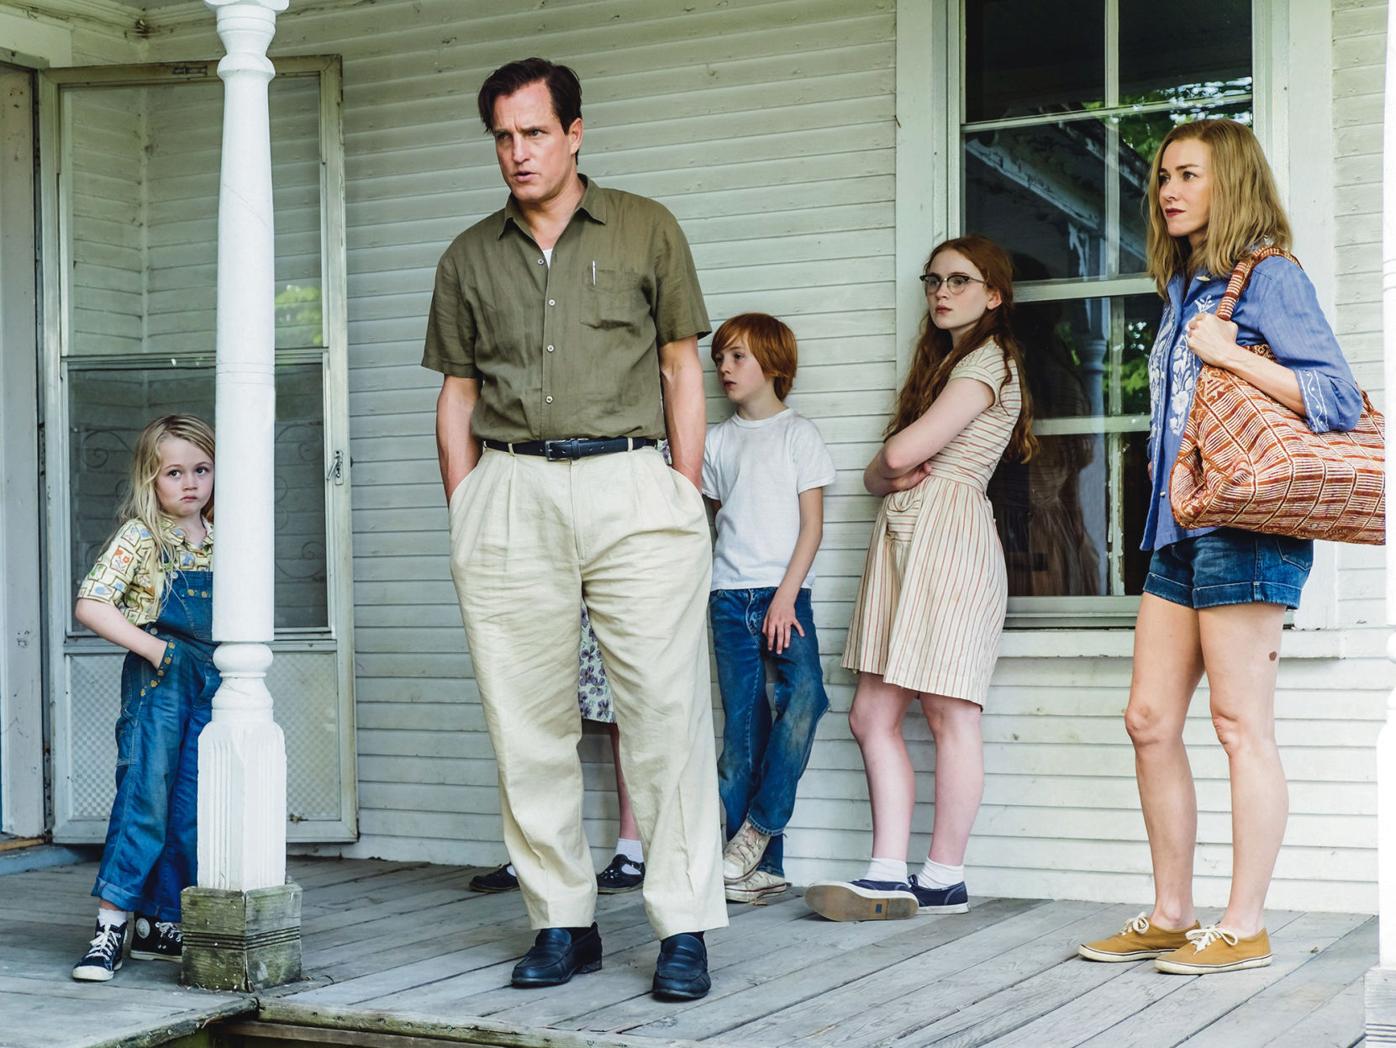 movie review the glass castle